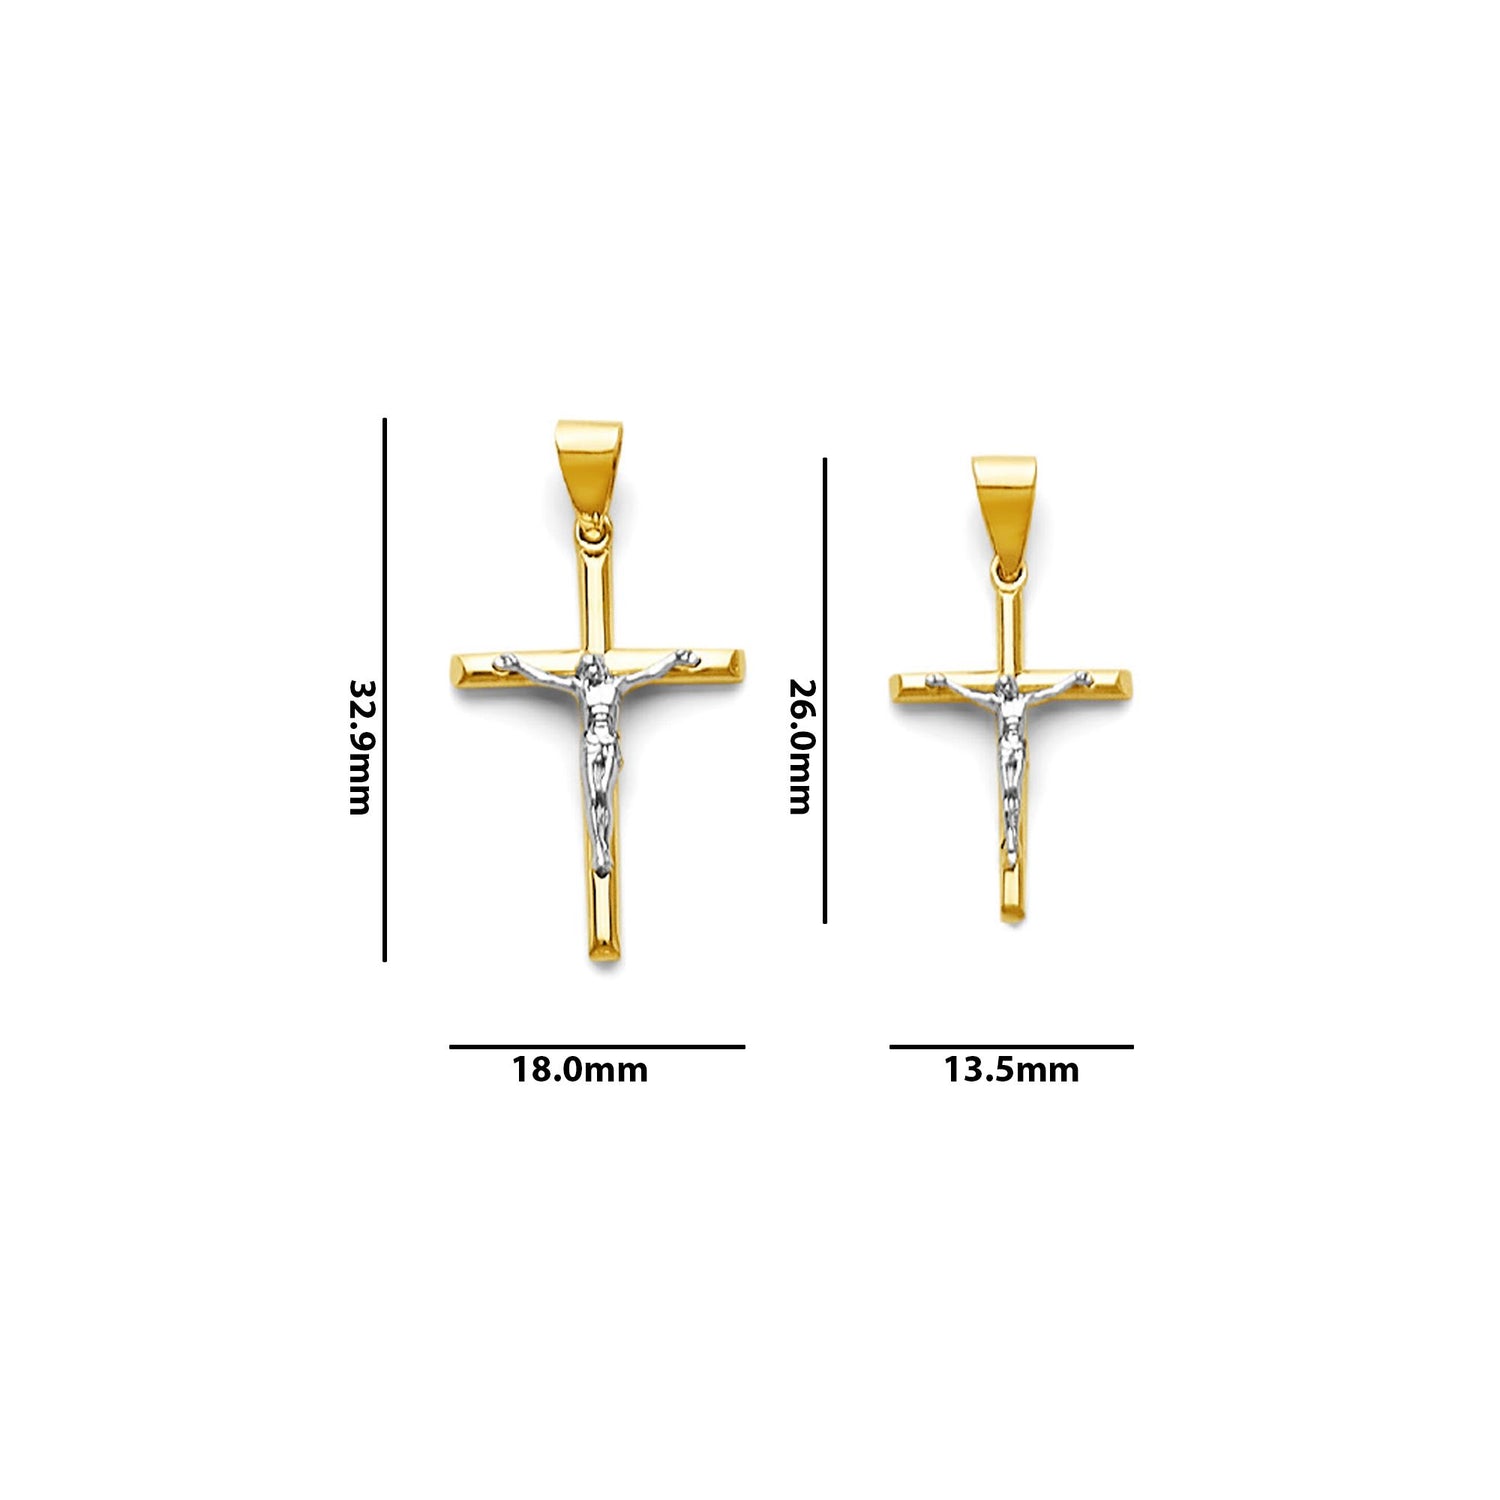 Two Tone Gold Crucifix Cross Pendant with Measurement